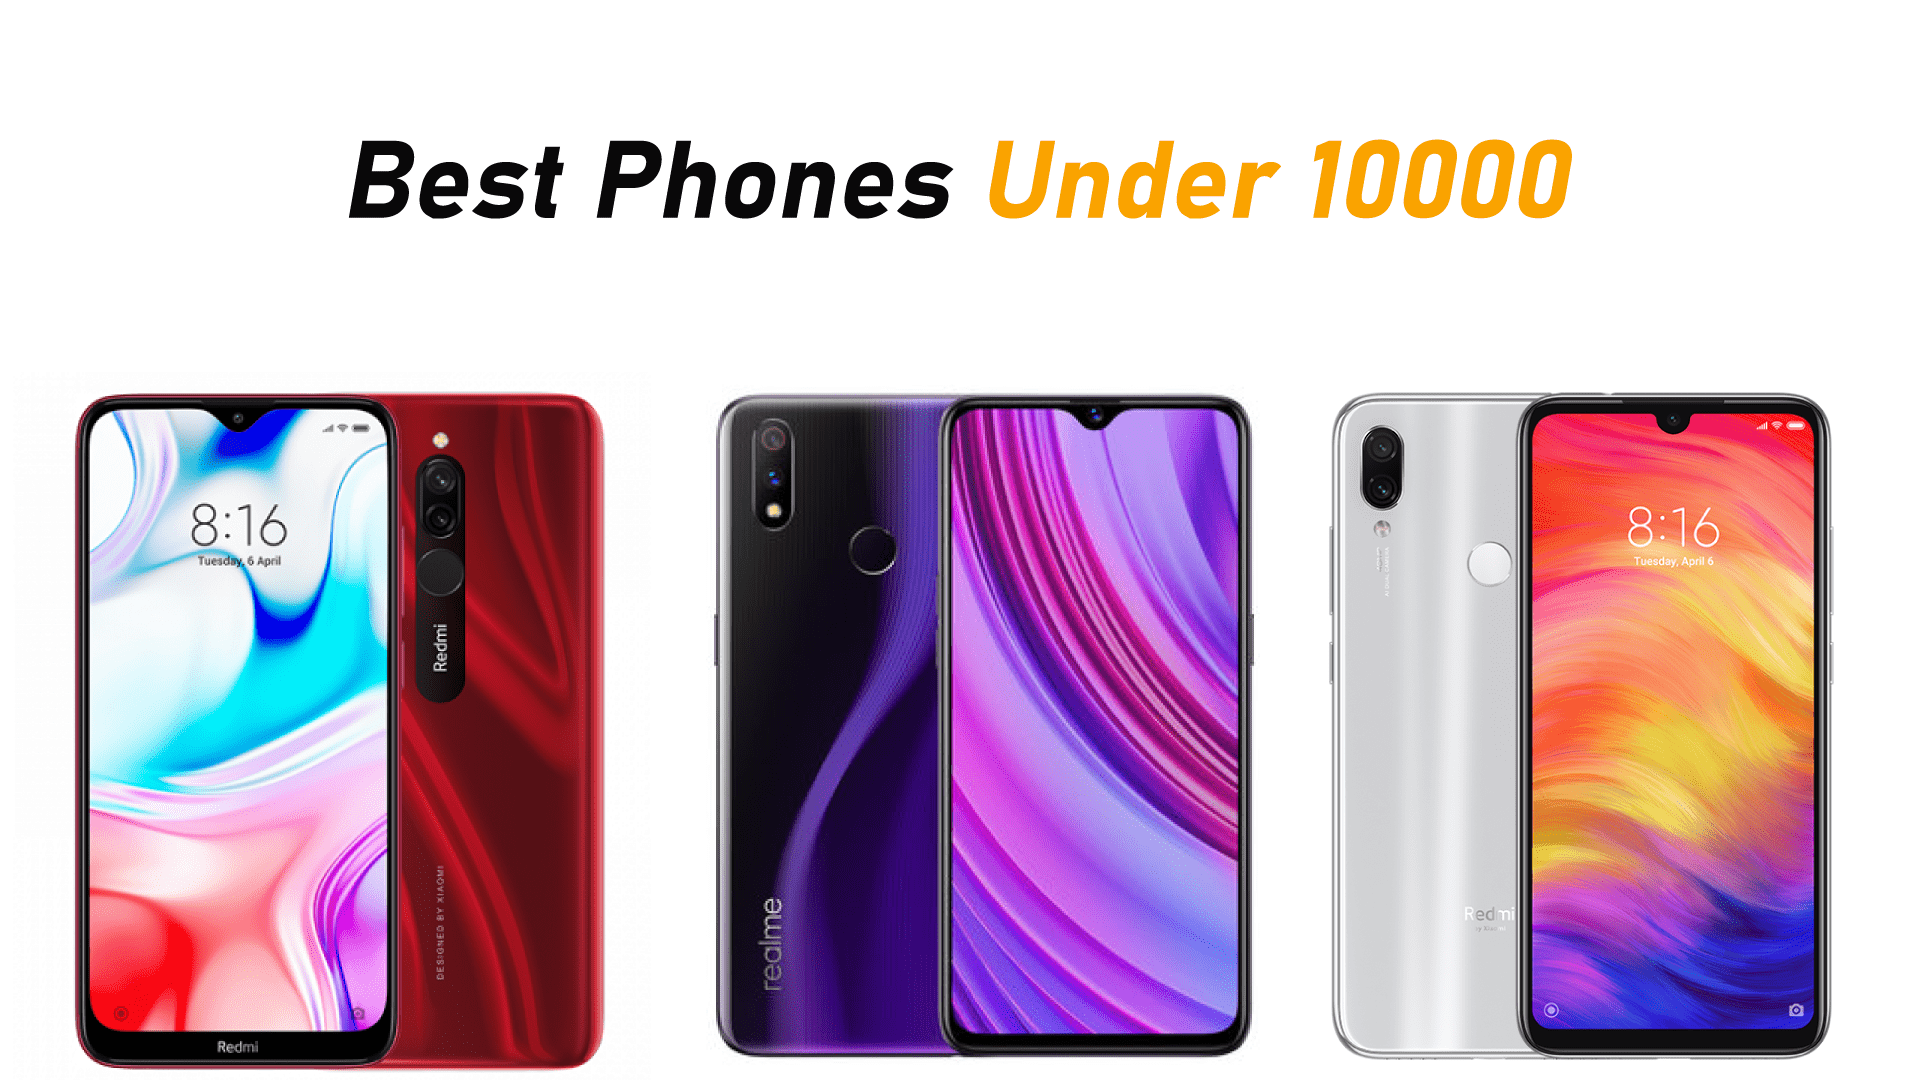 Best Phones Under 10000 In India (May 14, 2021) Tech Baked